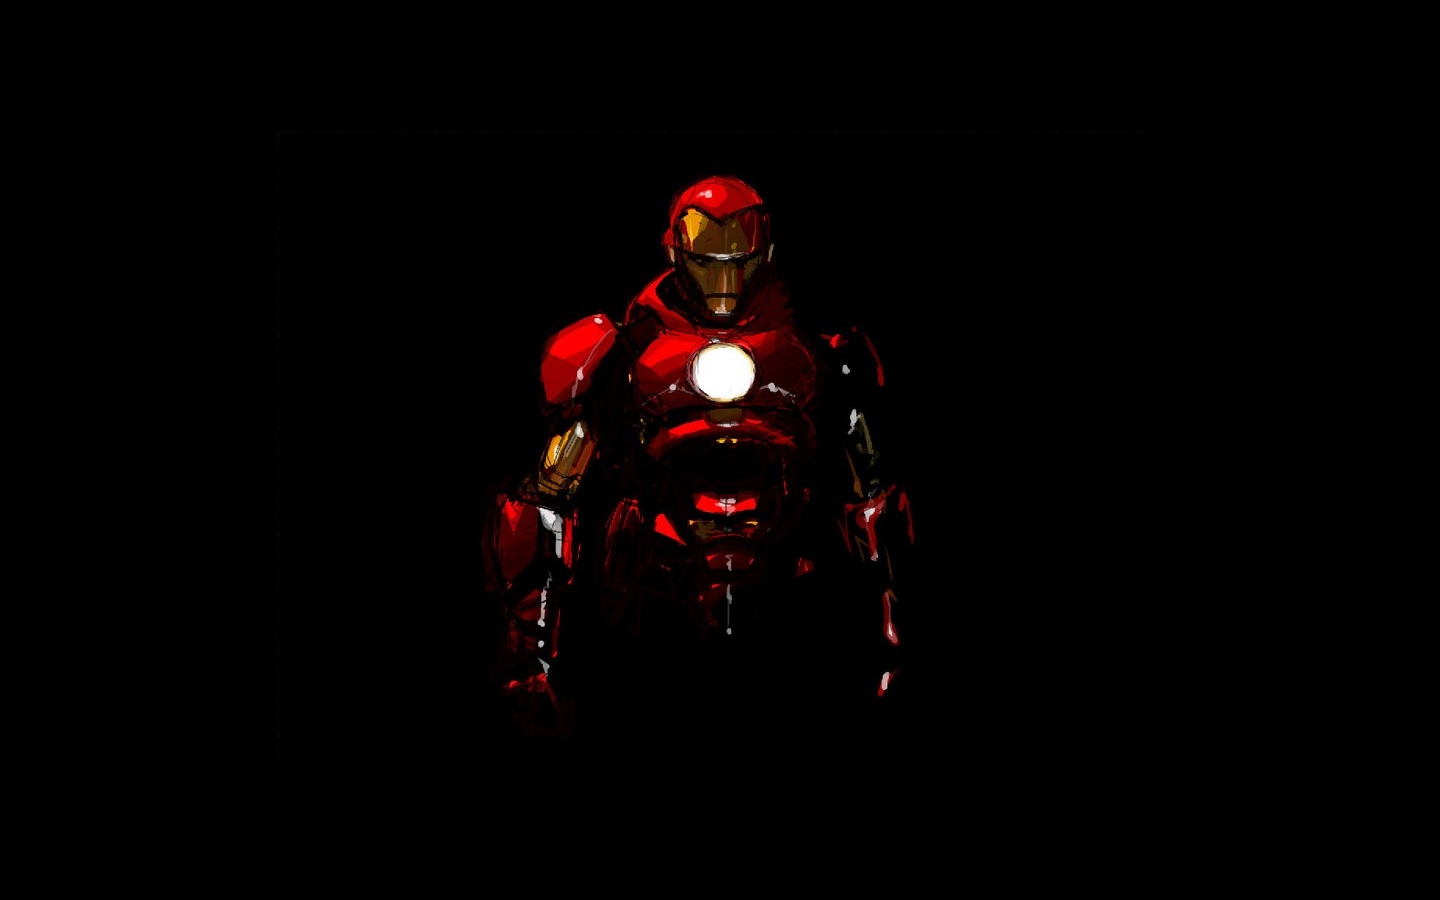 HDMOU TOP 22 IRON MAN WALLPAPERS IN HD 1440x900